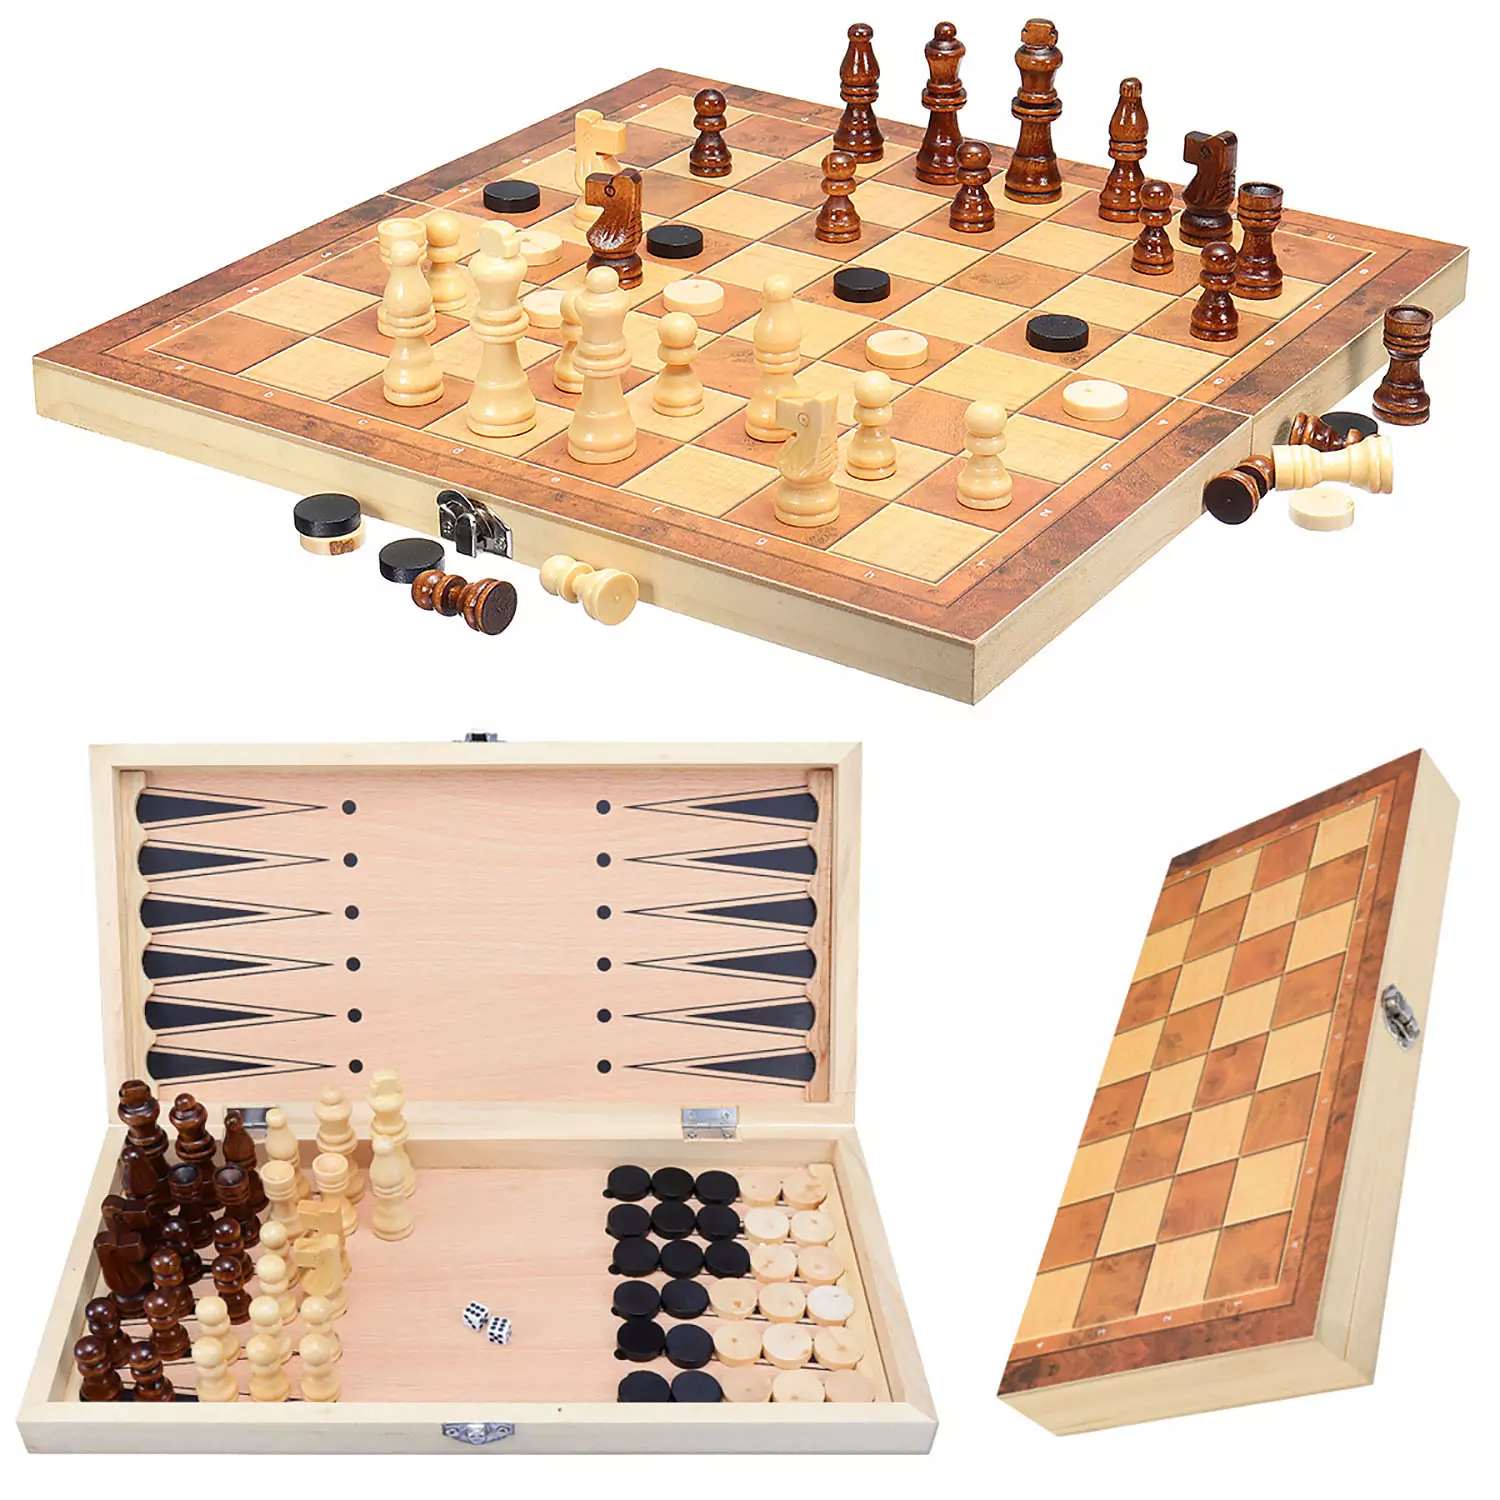 CHESS DRAUGHTS BACKGAMMON 3 IN 1 WOODEN BOARD GAMES SET COMPENDIUM GAMES 